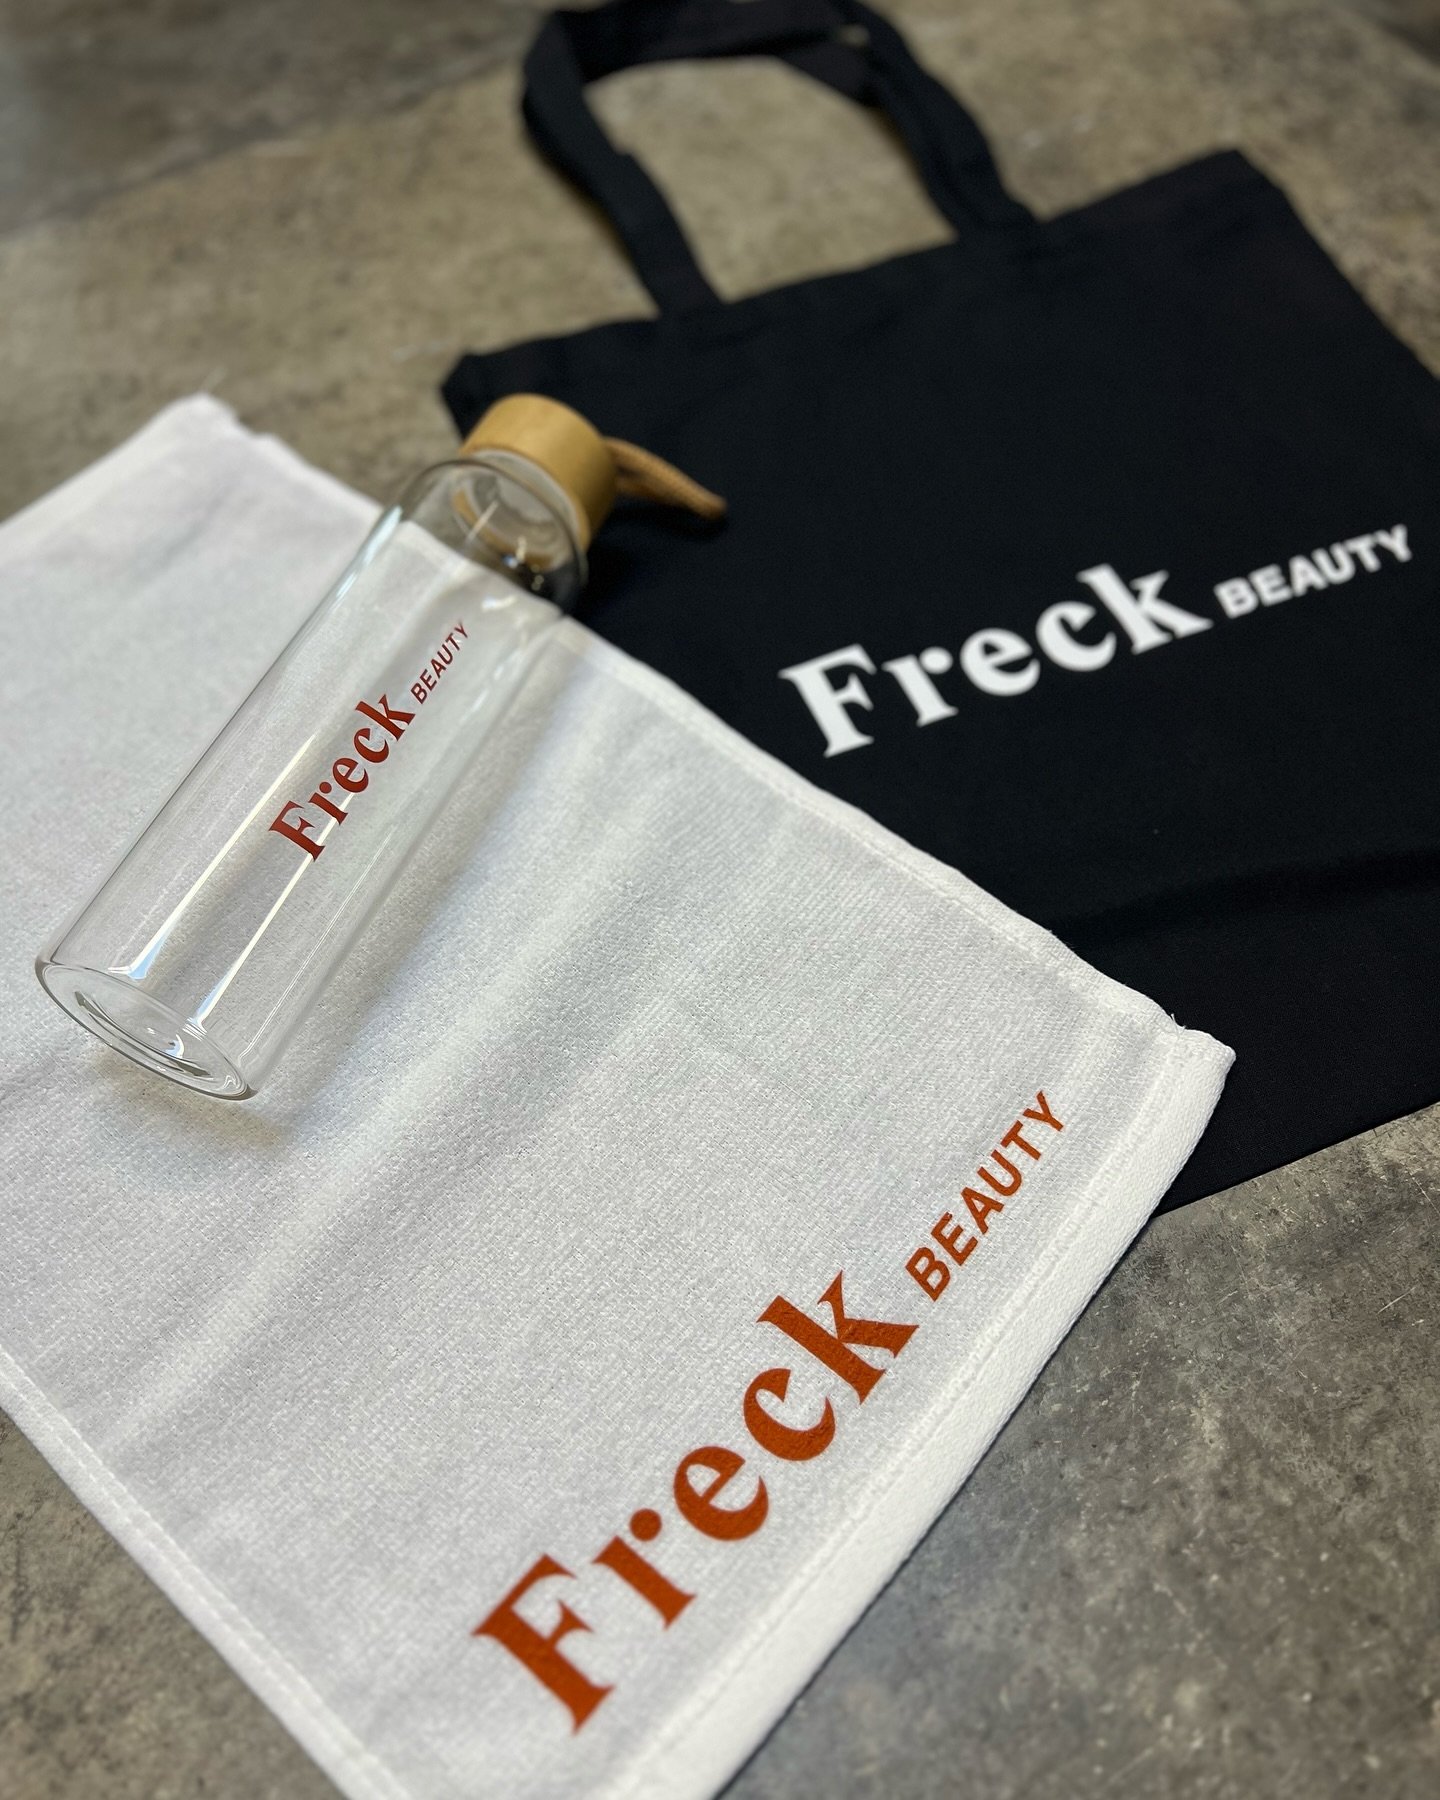 Bottles, Bags, &amp; Towels for @freck ✨

If you have a team, event, brand, or business and need custom shirts, hoodies, jerseys, hats, tote bags, patches, etc., contact us today for a free quote! 

info@agprintcompany.com 📧
323-744-9622 📞📞

#scre